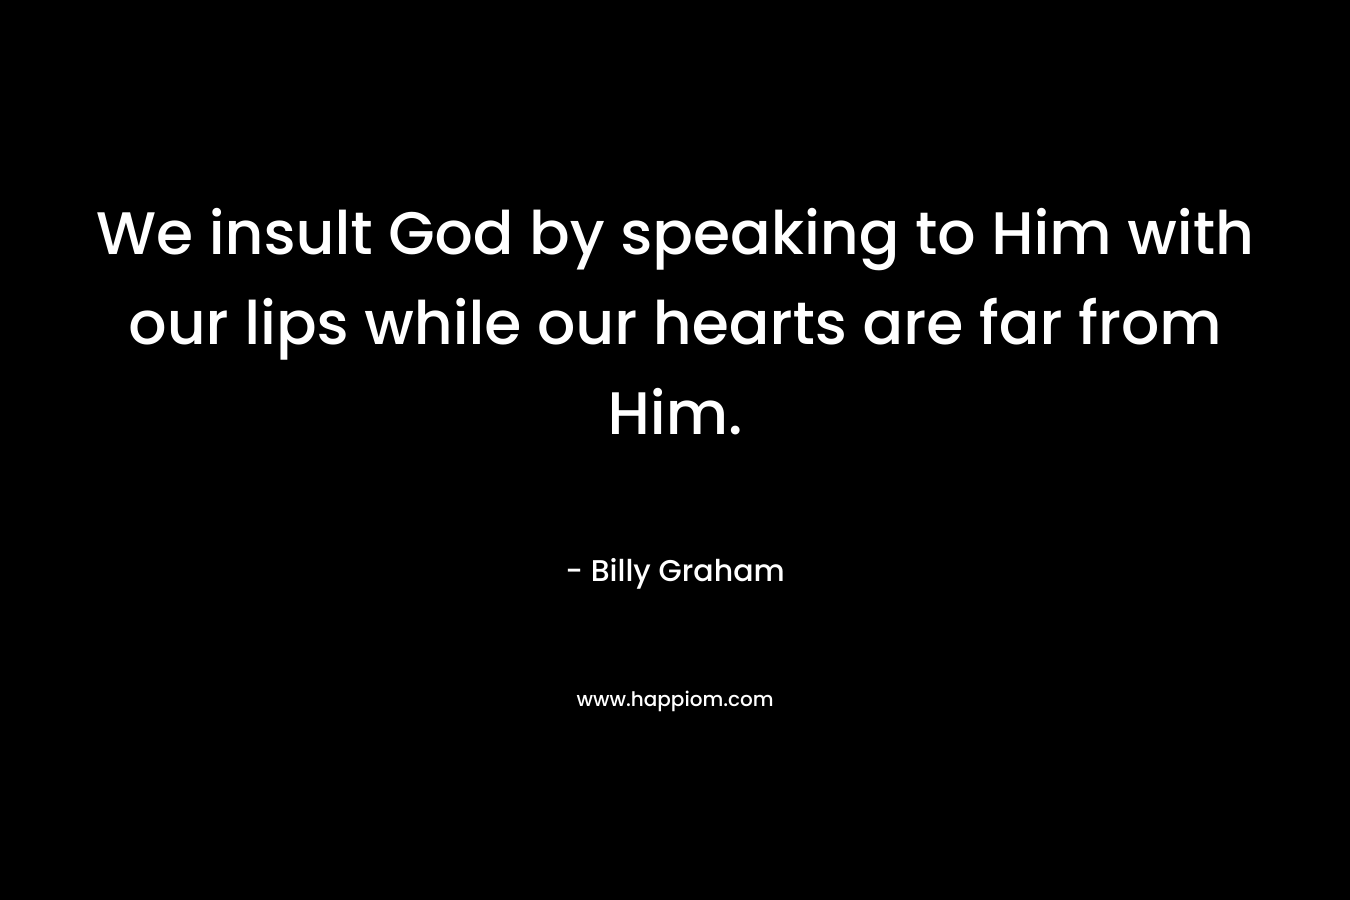 We insult God by speaking to Him with our lips while our hearts are far from Him.